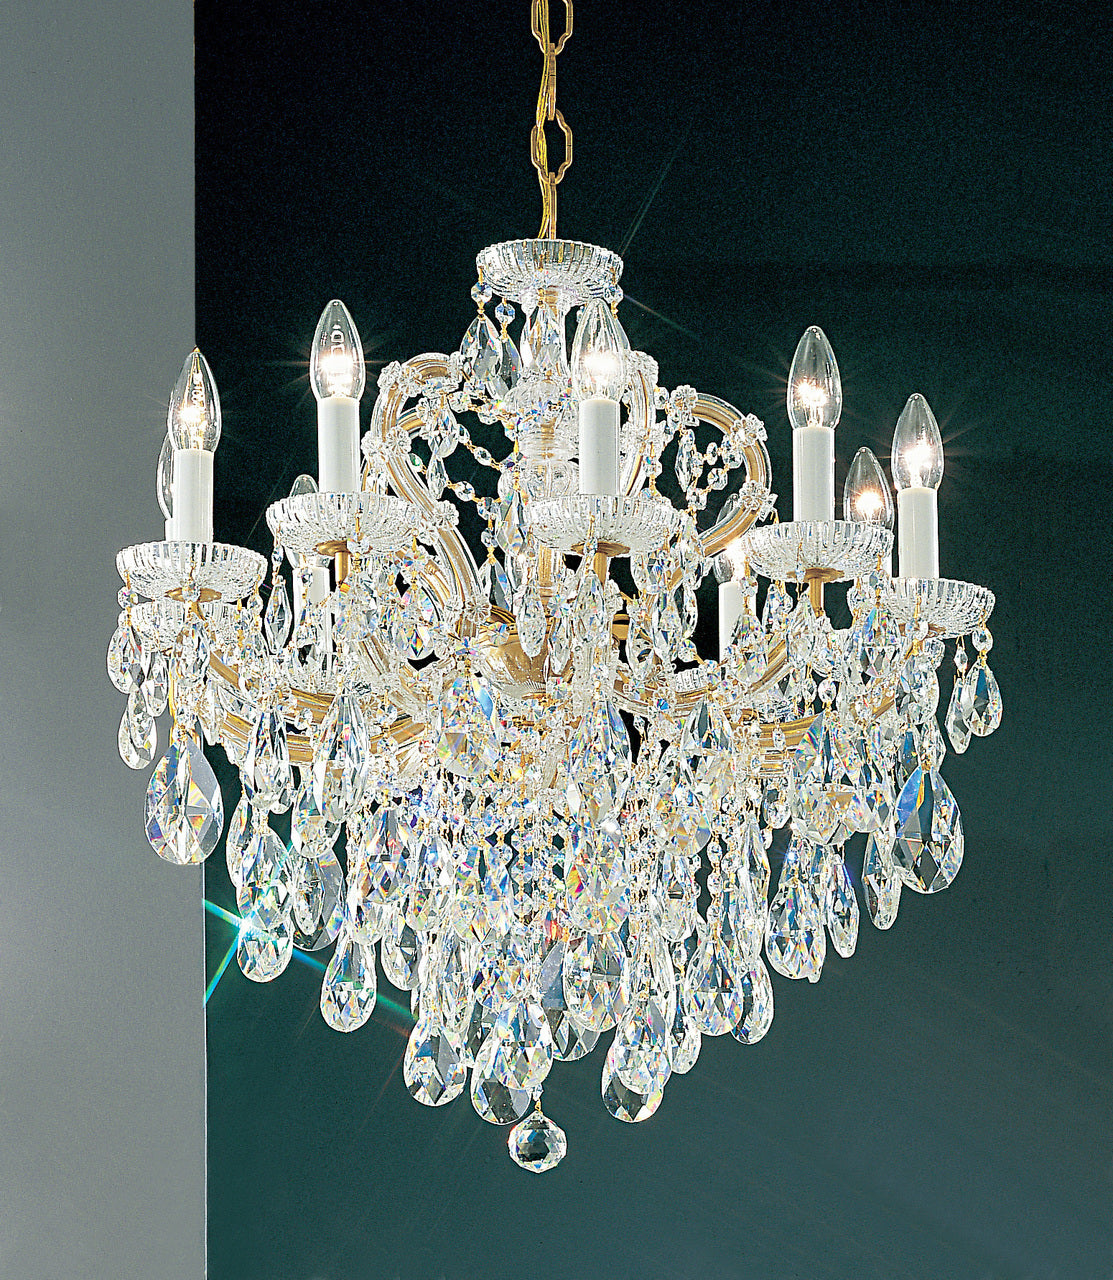 Classic Lighting 8120 OWG SC Maria Theresa Traditional Crystal Chandelier in Olde World Gold (Imported from Italy)